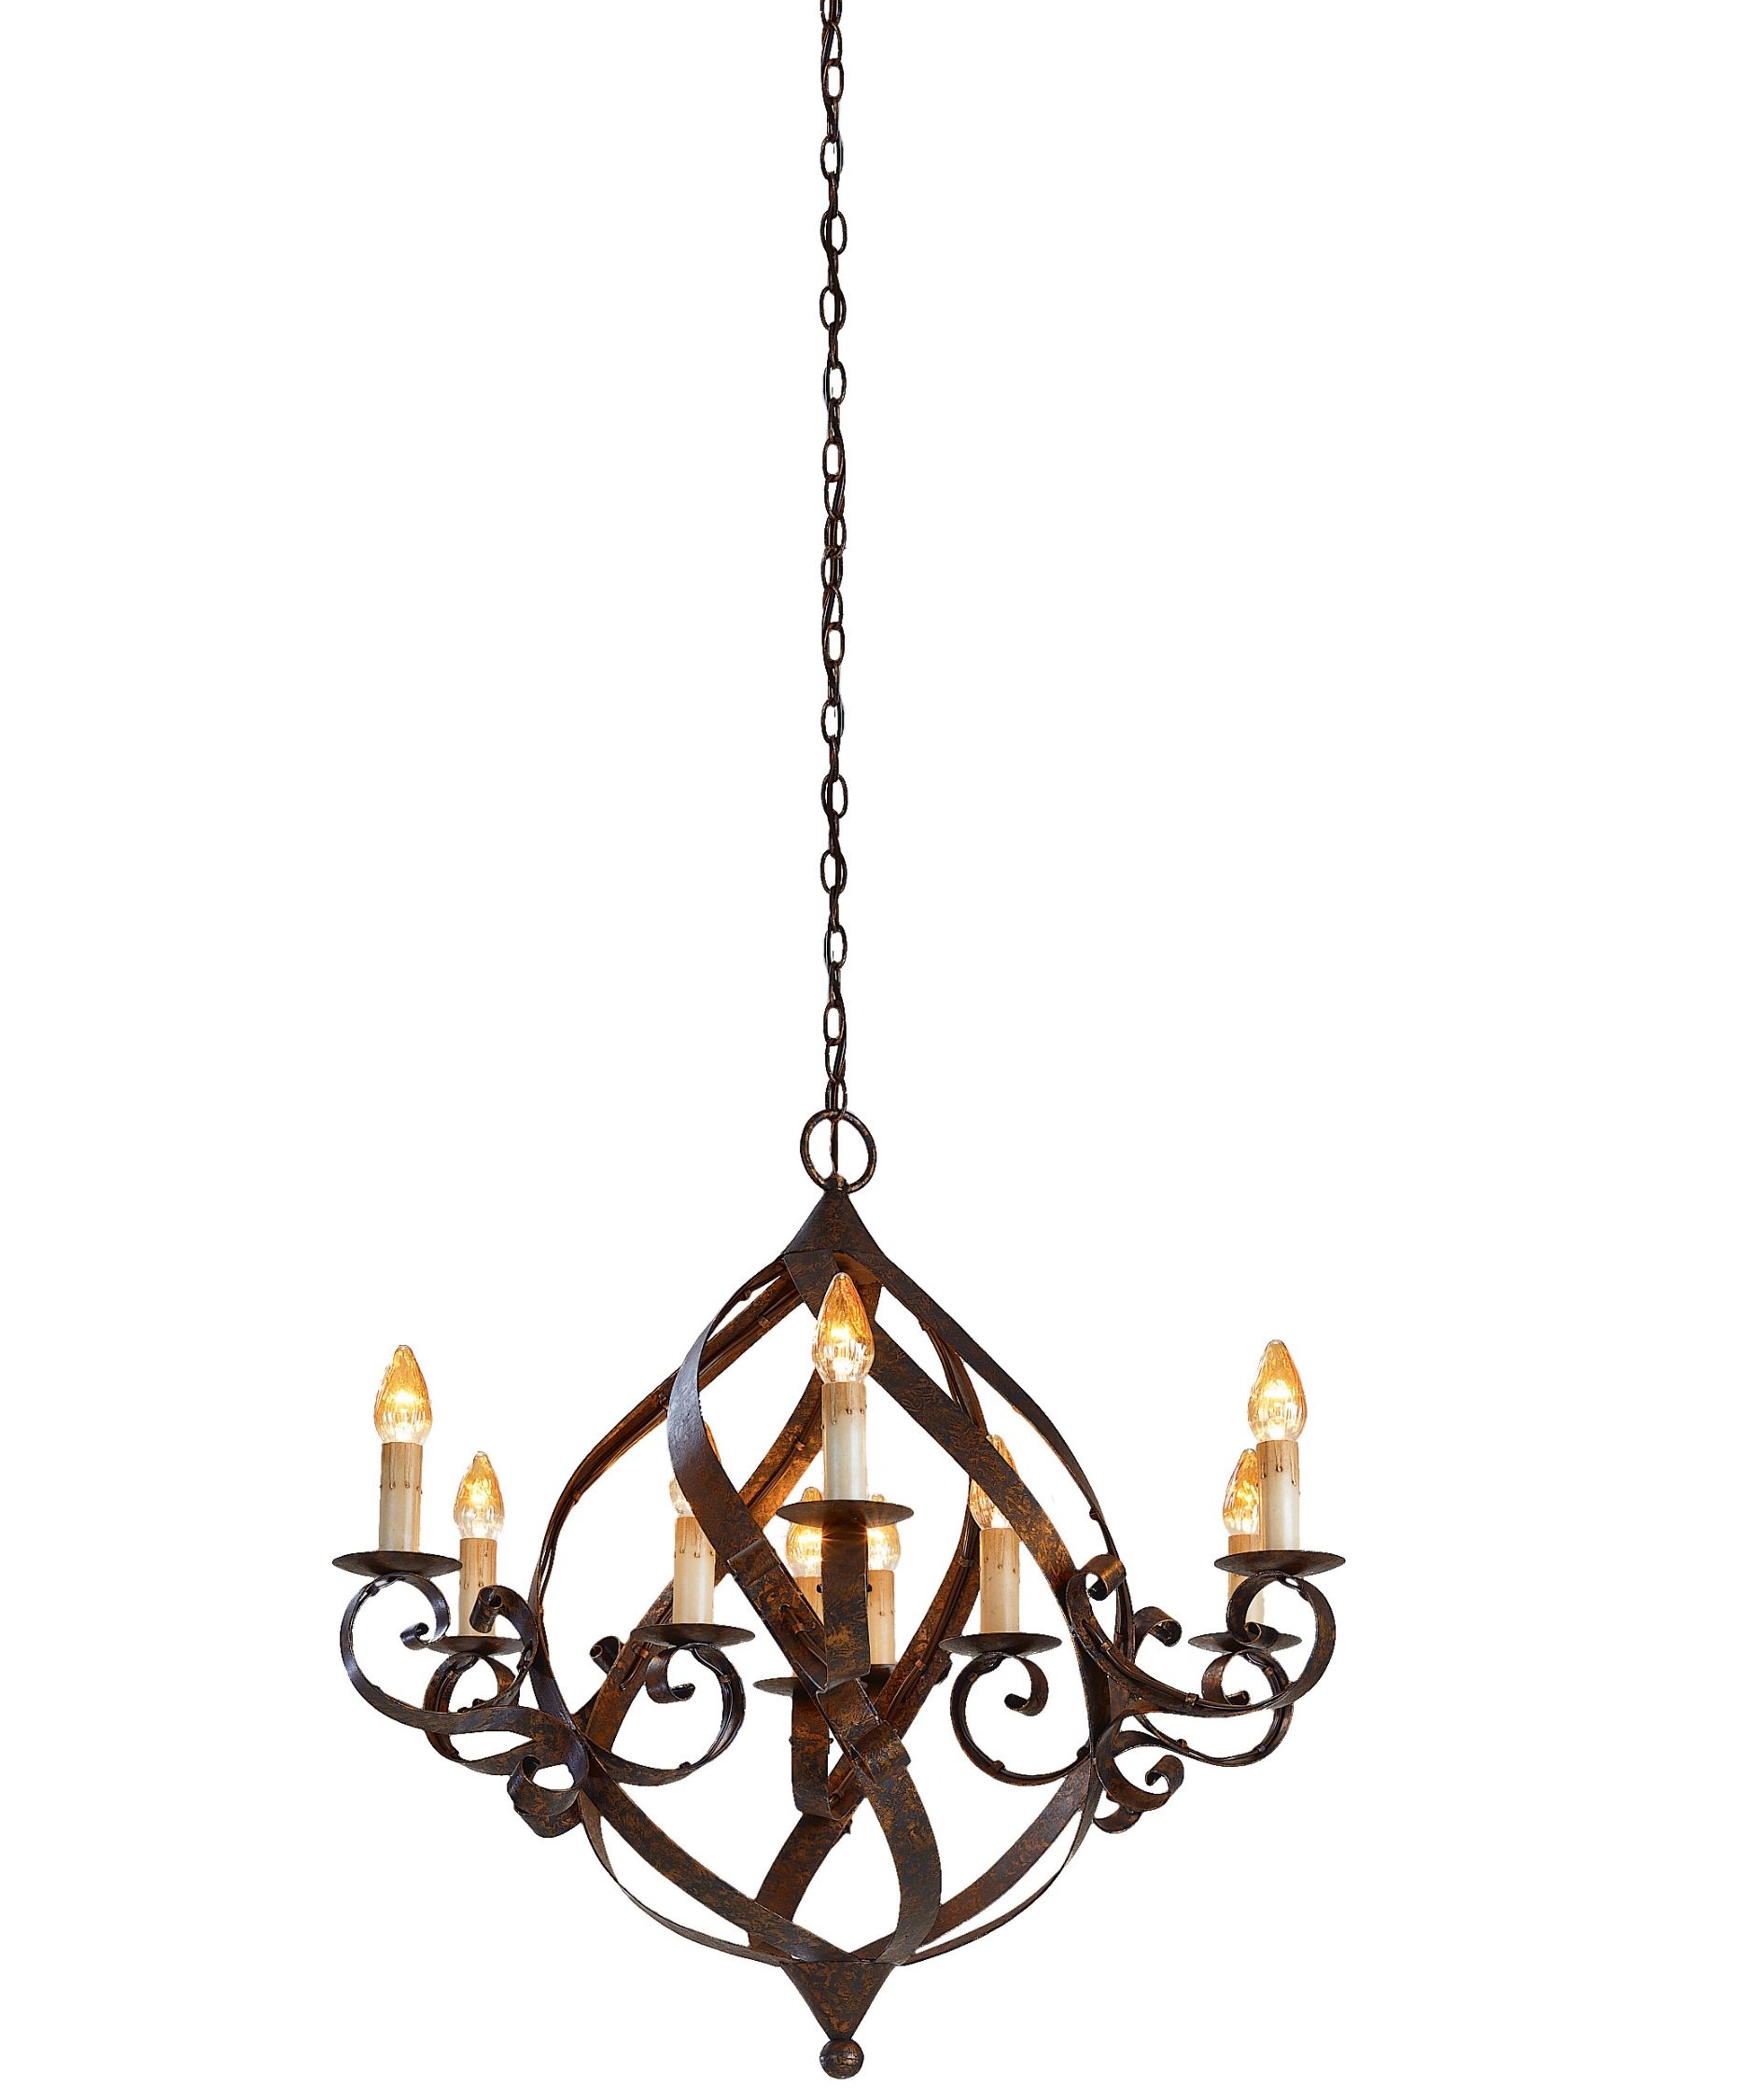 Round candle chandelier 10